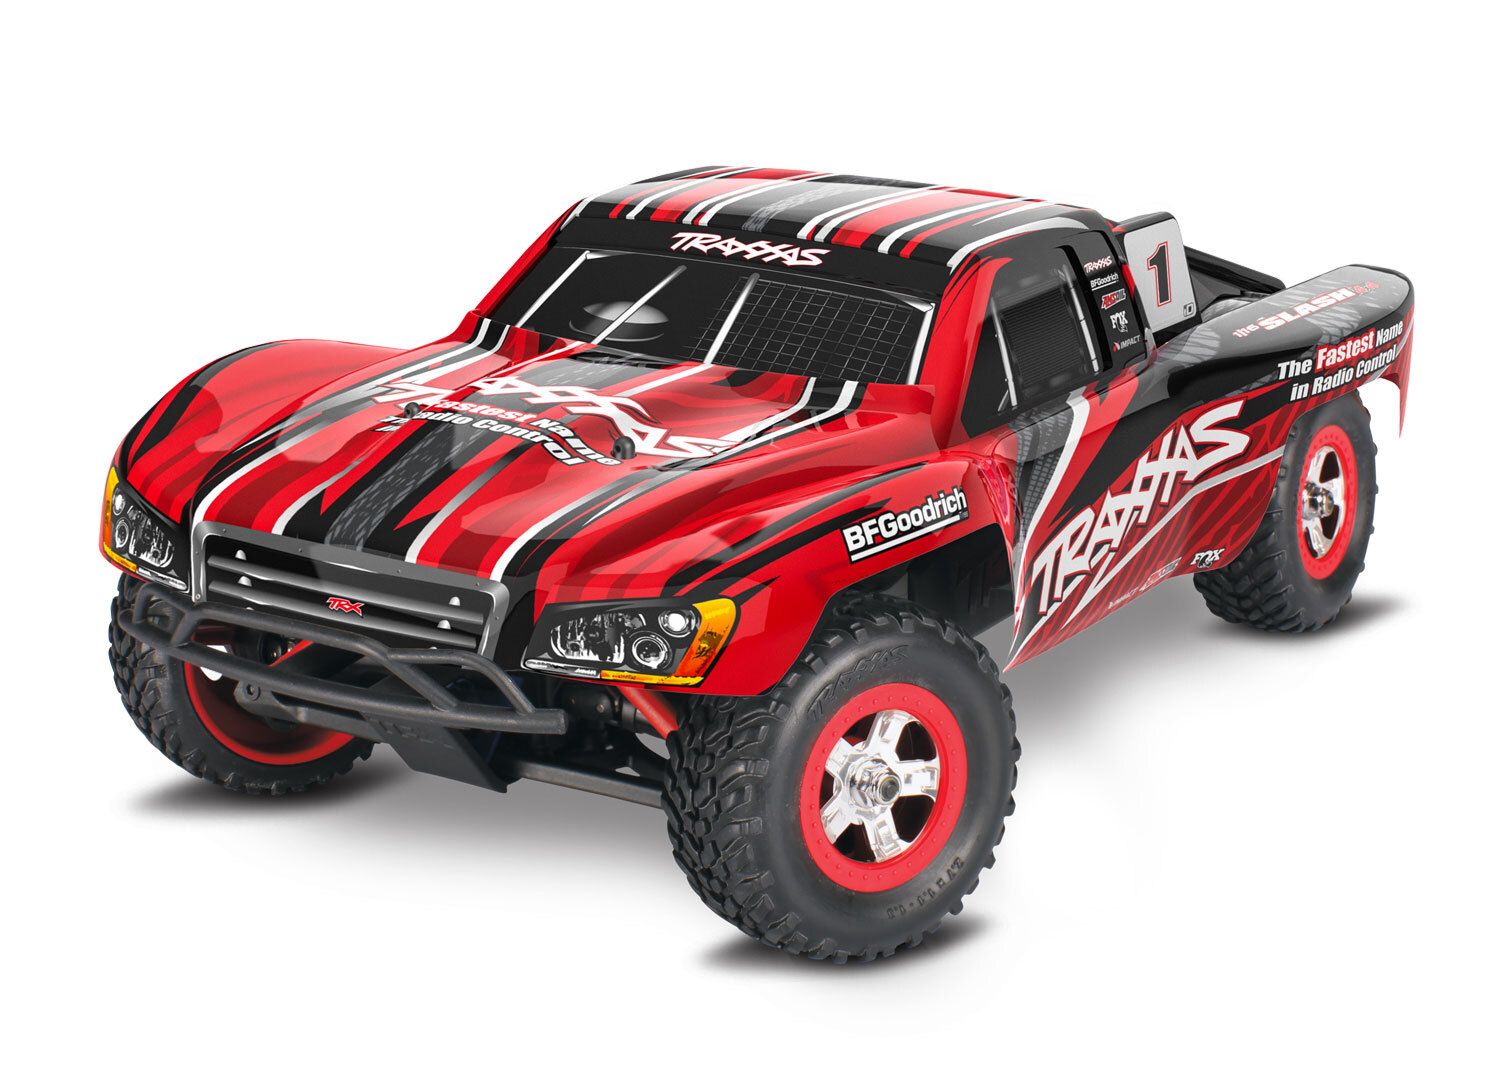 TRAXXAS 70054-8 Slash 1/16 Scale 4WD Electric Truck with USB-C charger. RTR with TQ 2.4GHz radio, Titan 550 motor and XL-2.5 ESC. Includes: 6-Cell NiMH 1200mAh battery